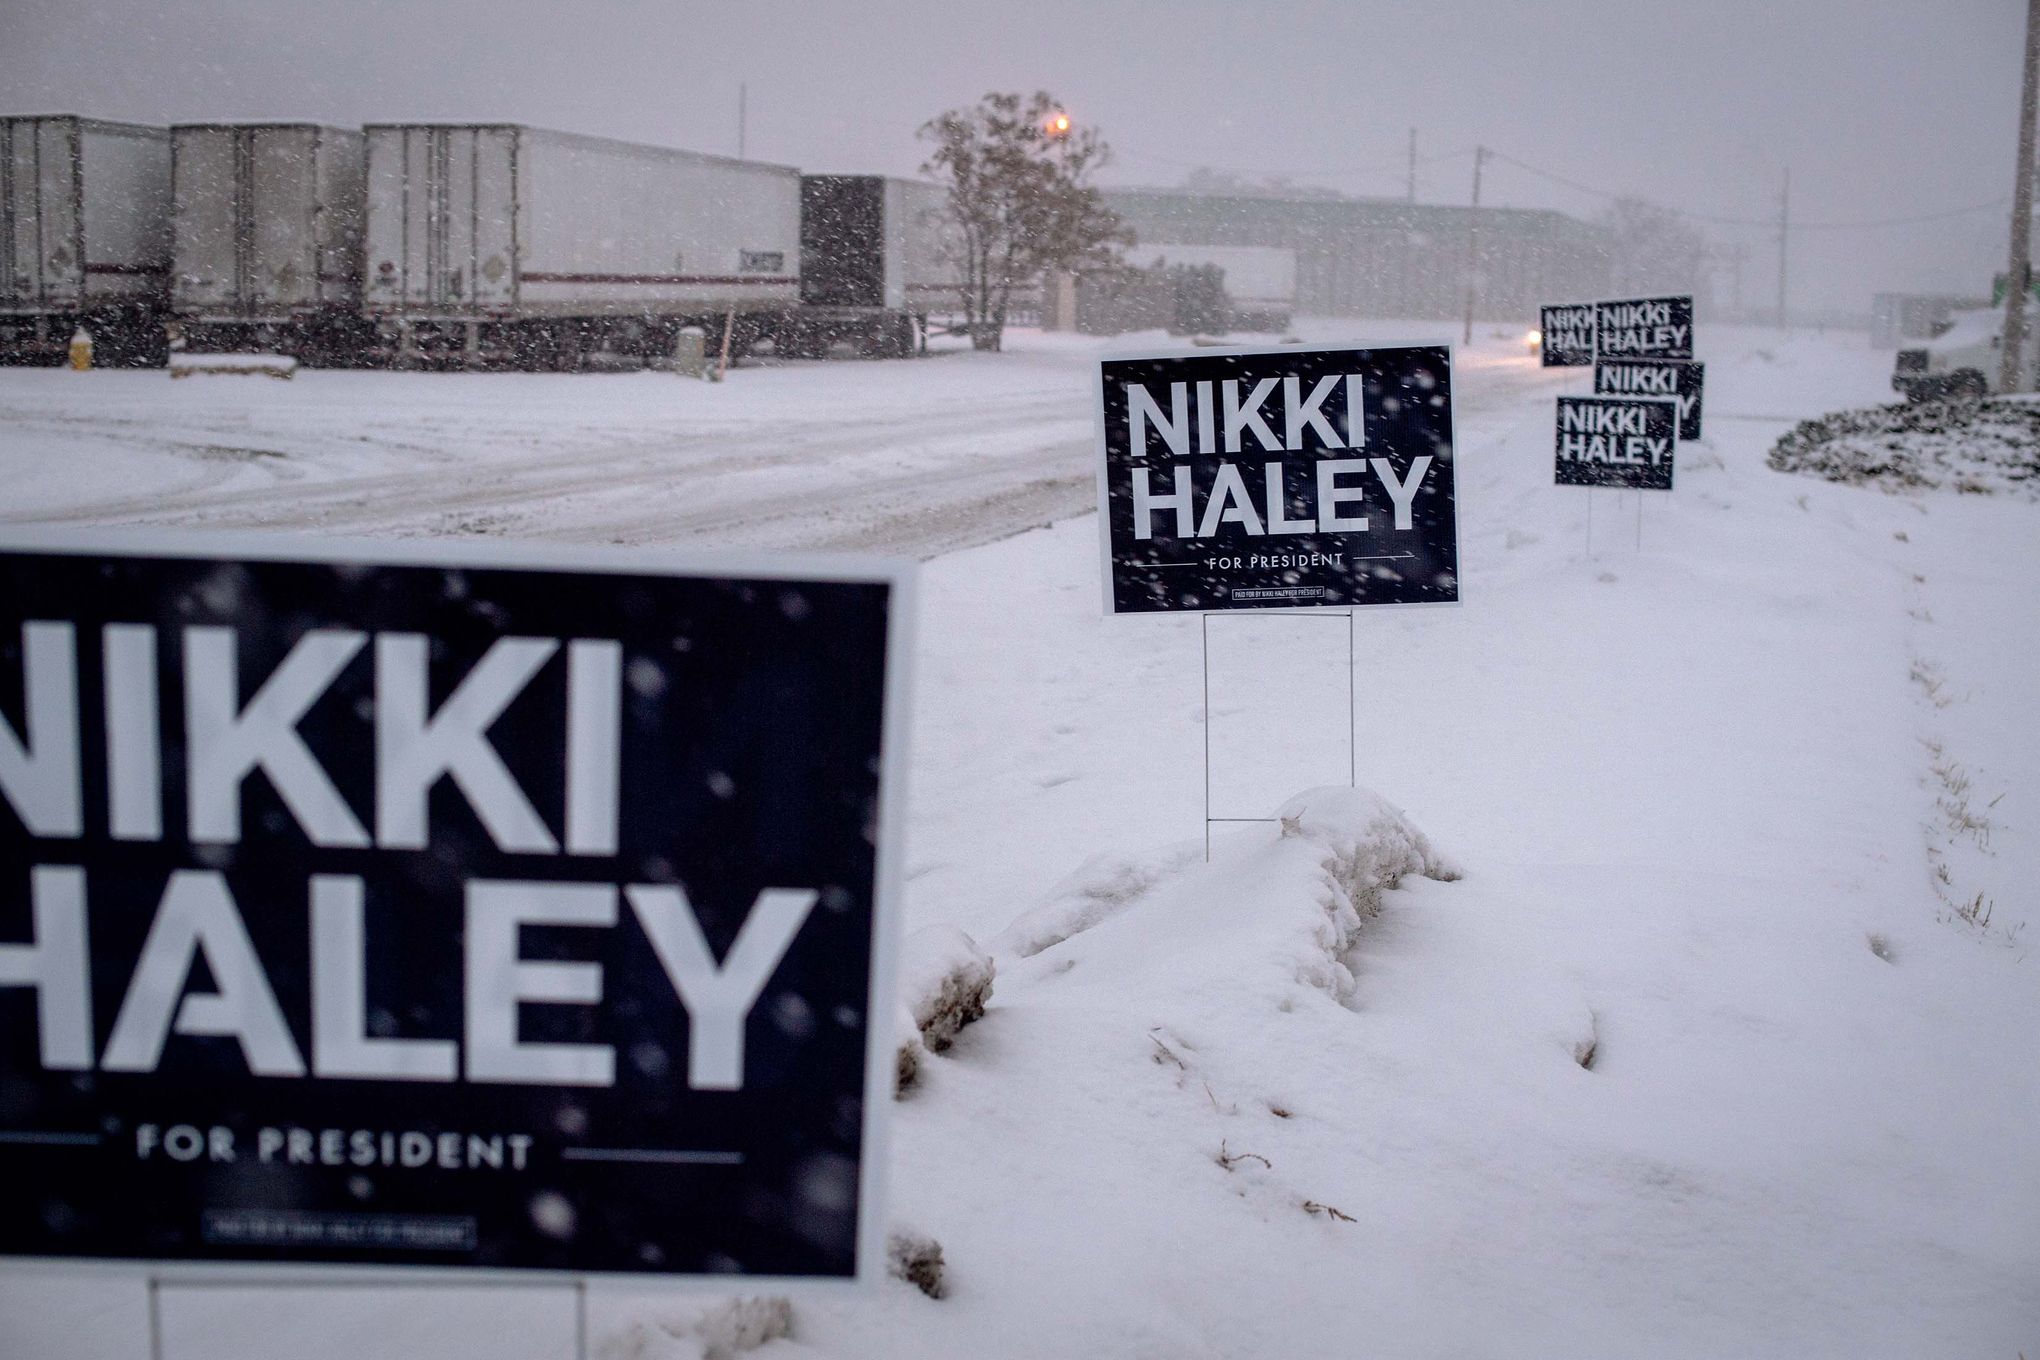 In Iowa, Nikki Haley has the attention of Democrats and independents